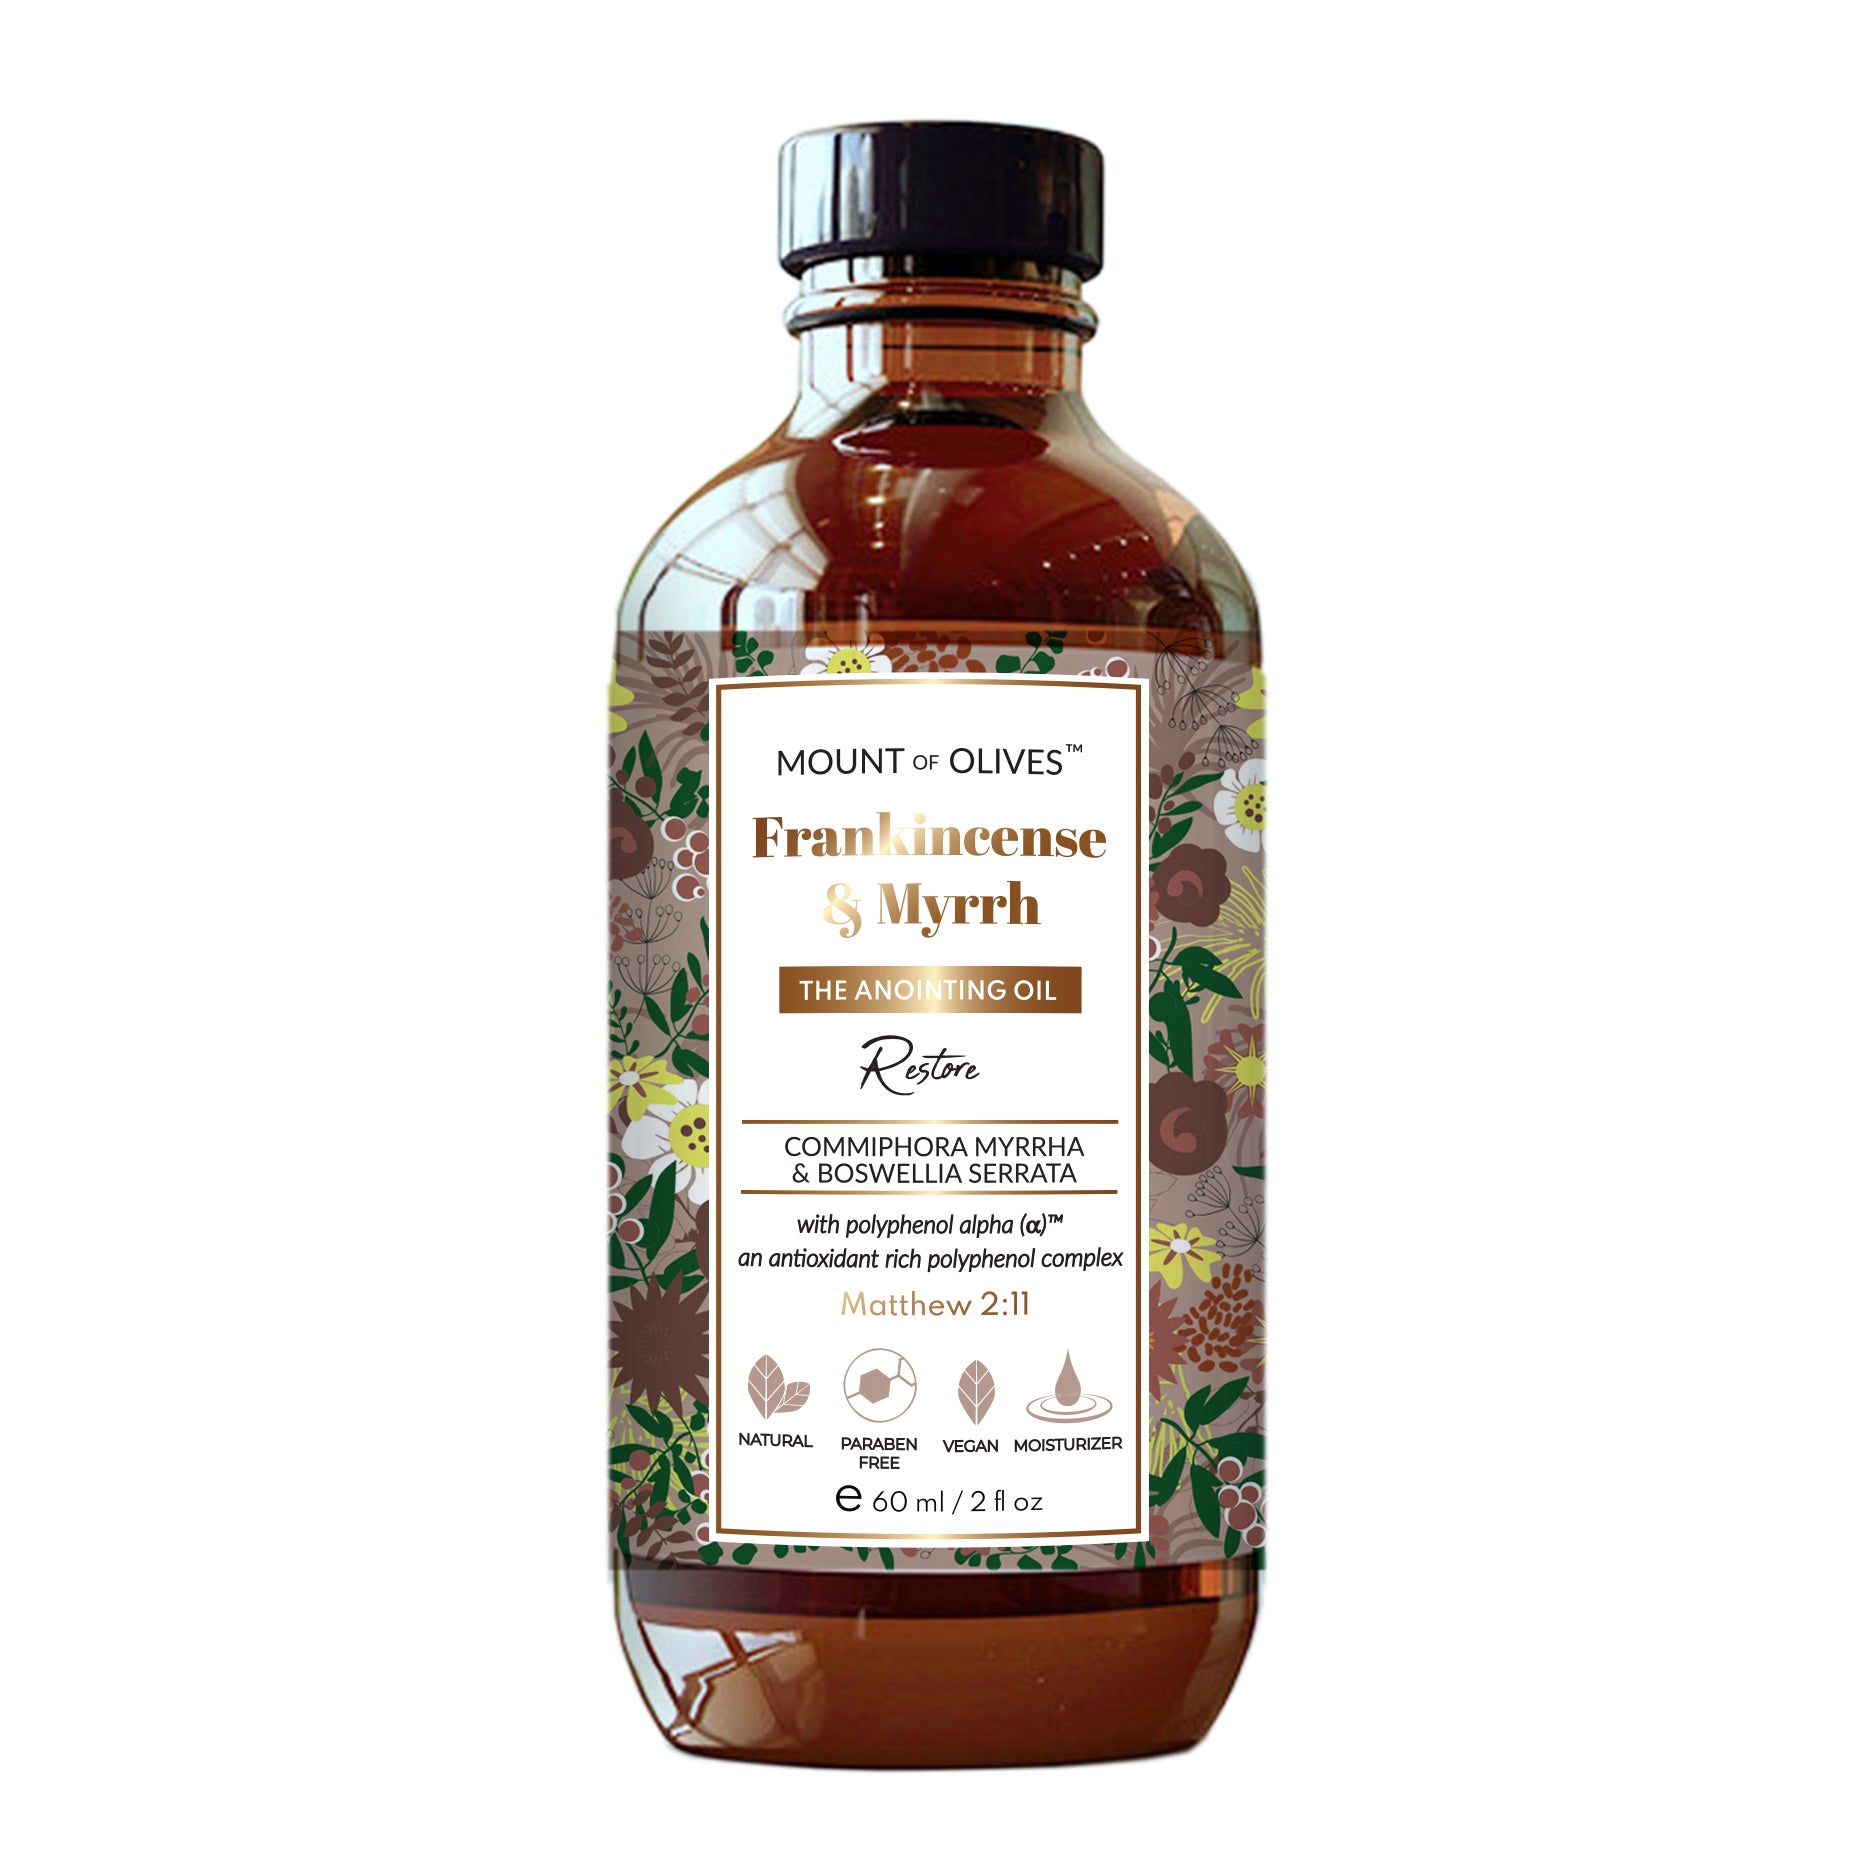 Frankincense & Myrrh Anointing Oil With Cosmeceuticals Derived from Biblical Botanicals